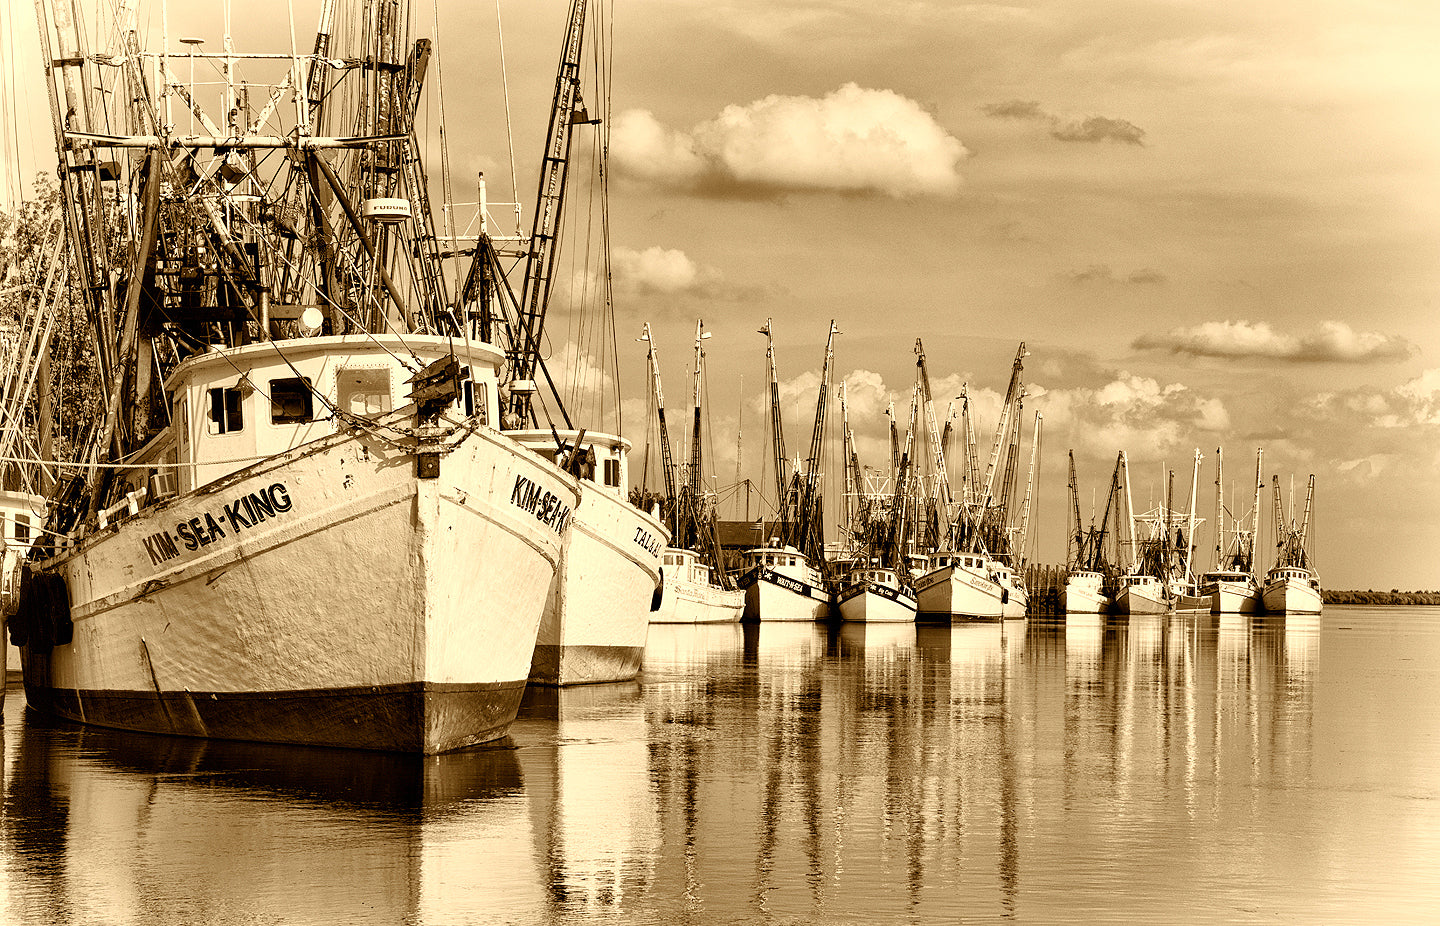 A Landscape Fine Art Photograph by Mike Ring of a shrimp Boats in Darien Georgia. 